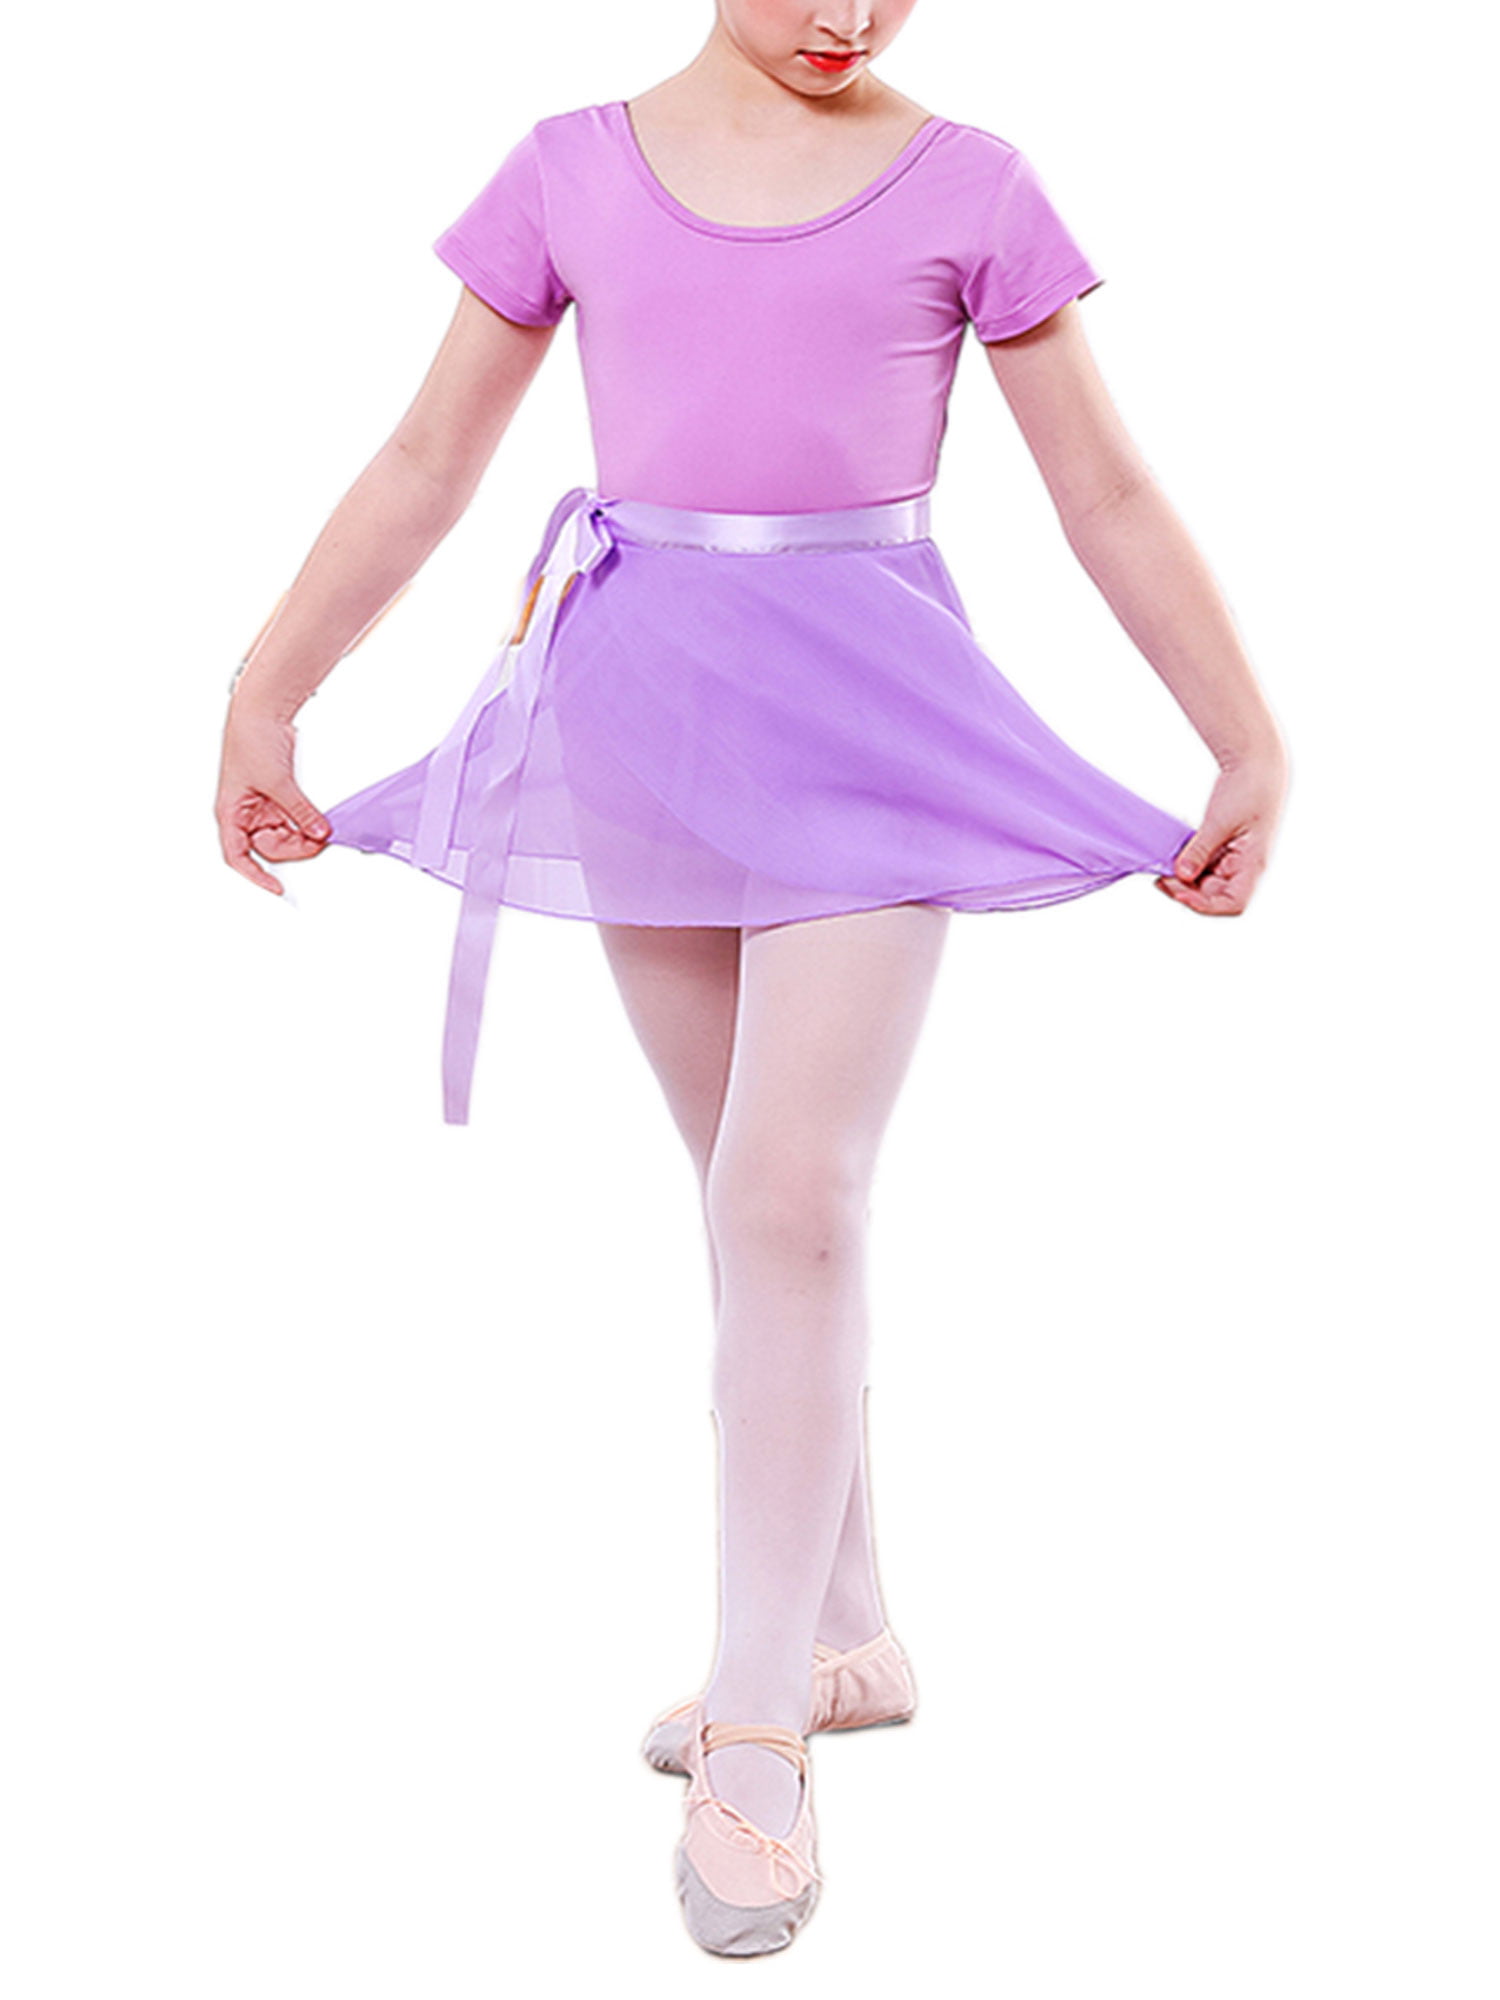 Move Dance Girls Ballet Dance Dress with Hollow Back Sparkle Tutu Skirted Leotard for 3-9 Years 